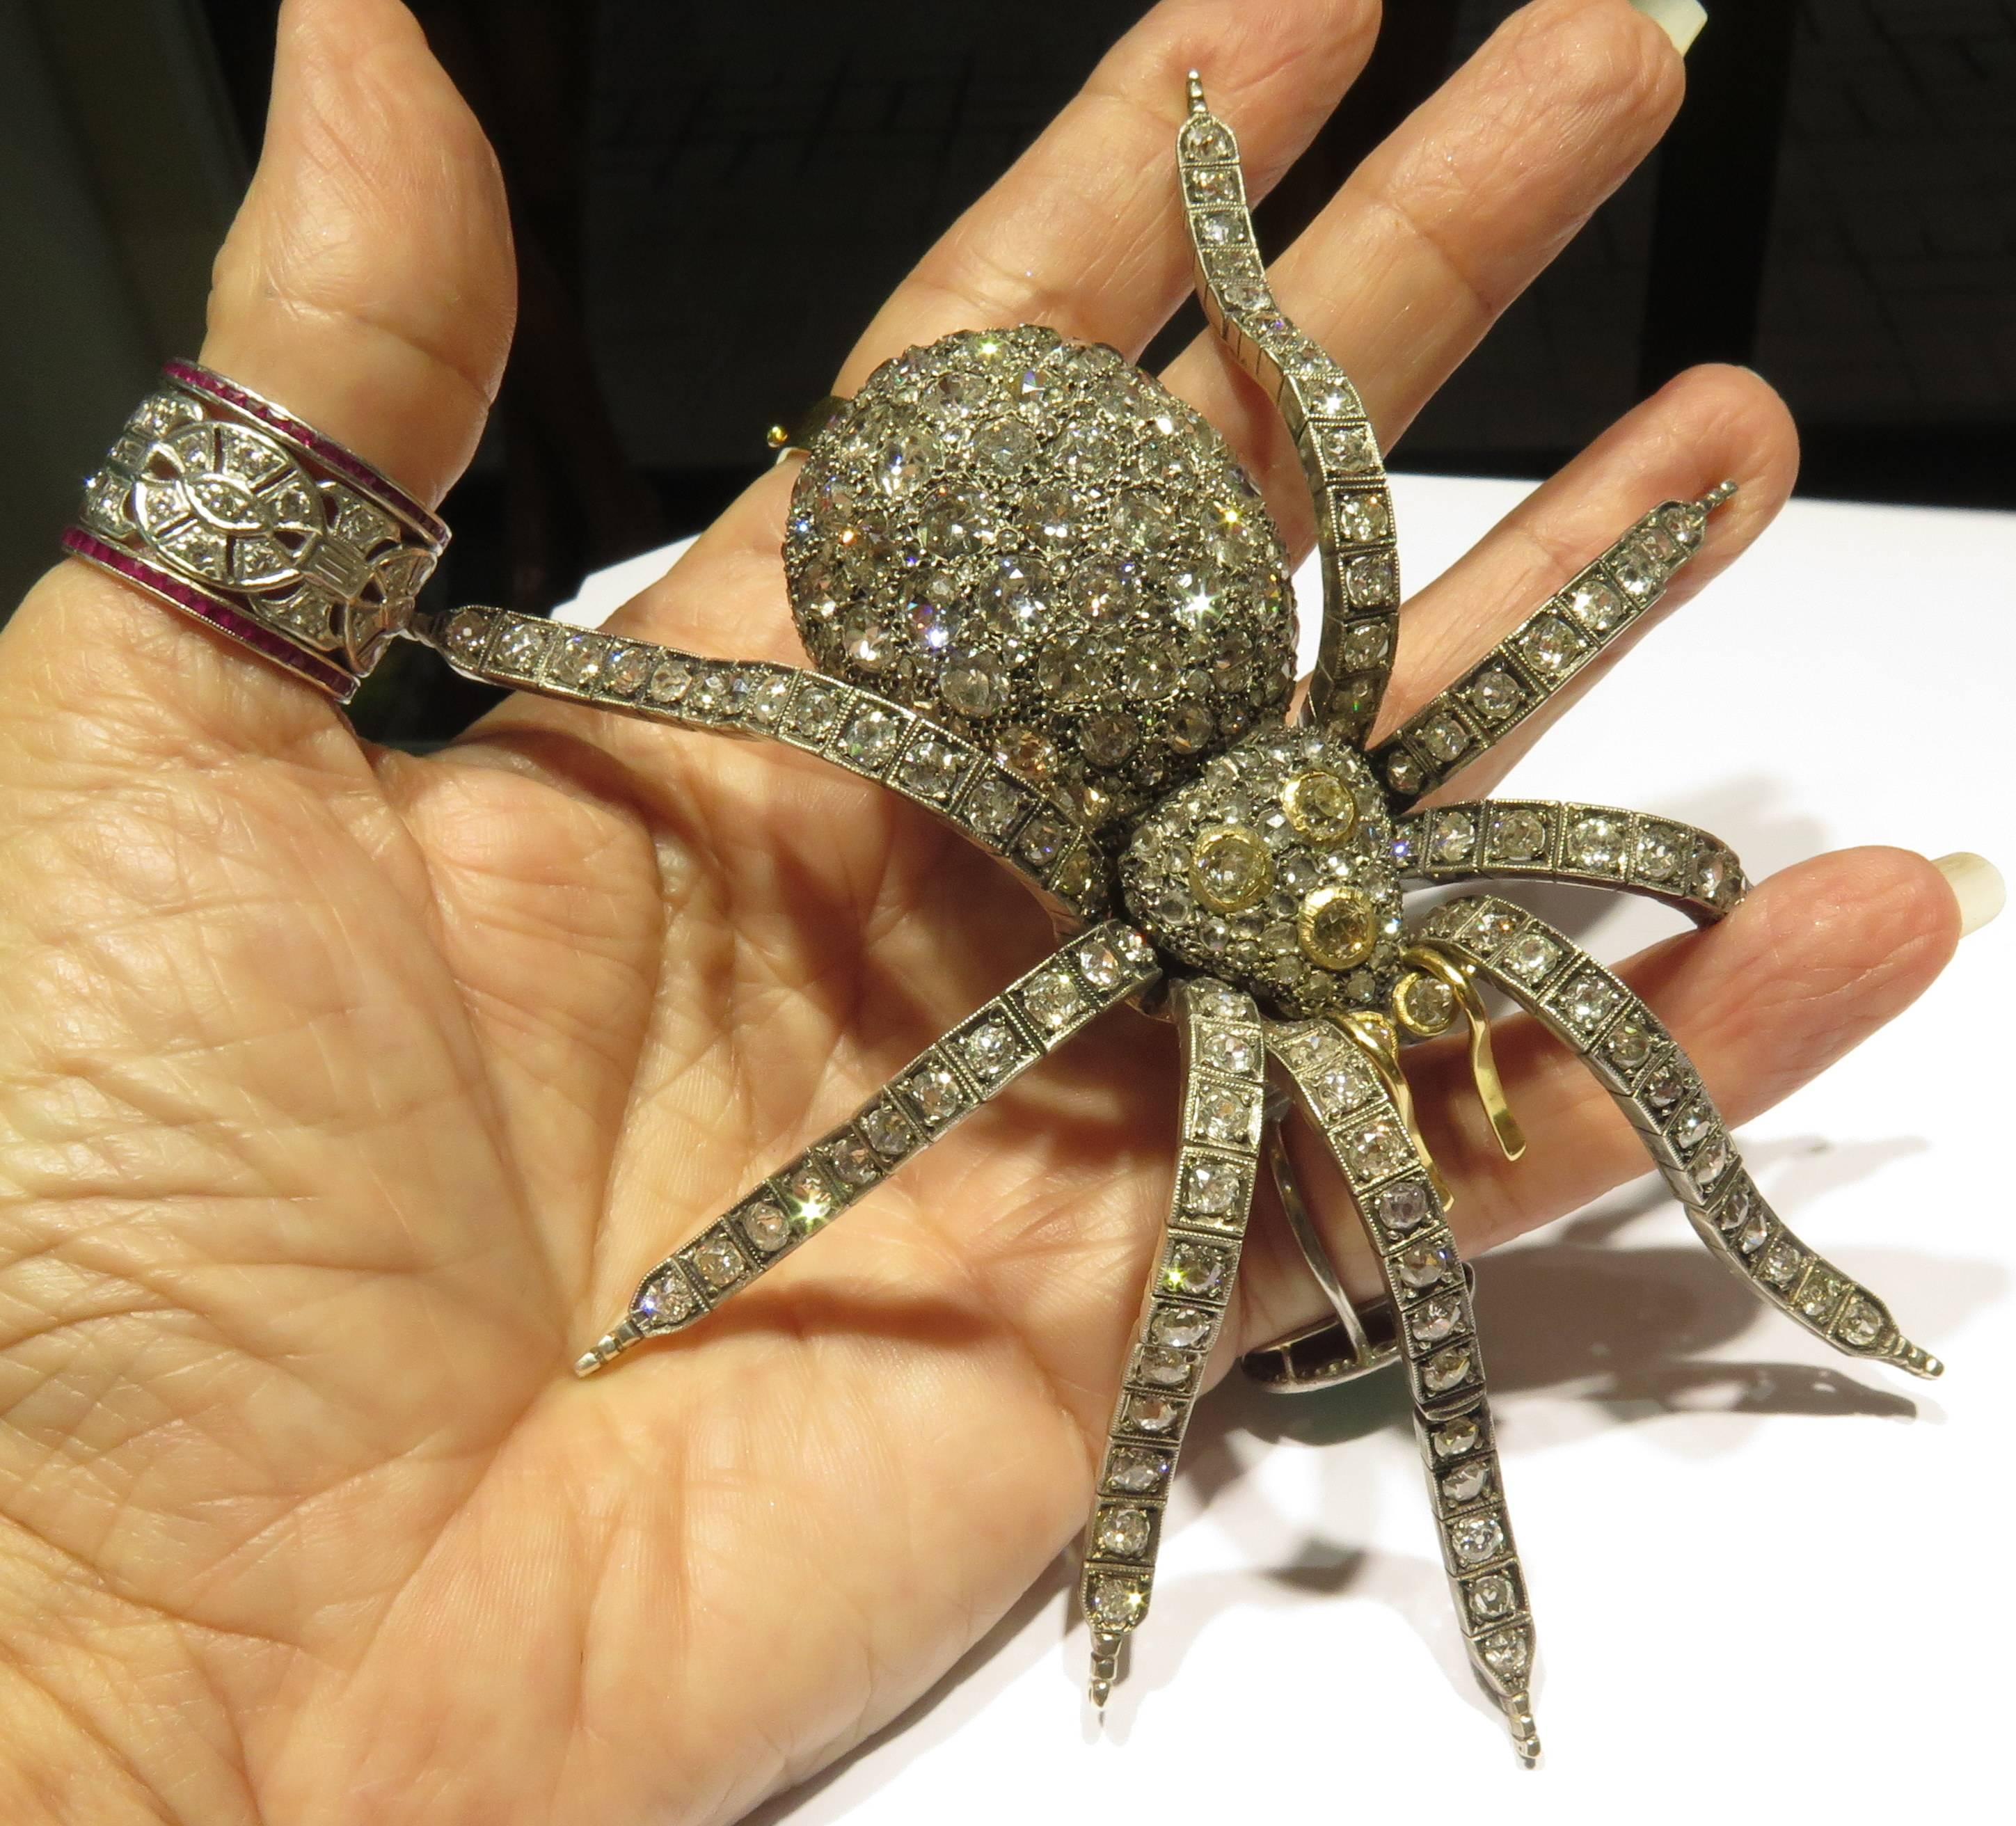 Women's or Men's Magnificent XtraLarge Spider Pin 5 5/8 in 43cts Diamonds Gold SilverTremblant c